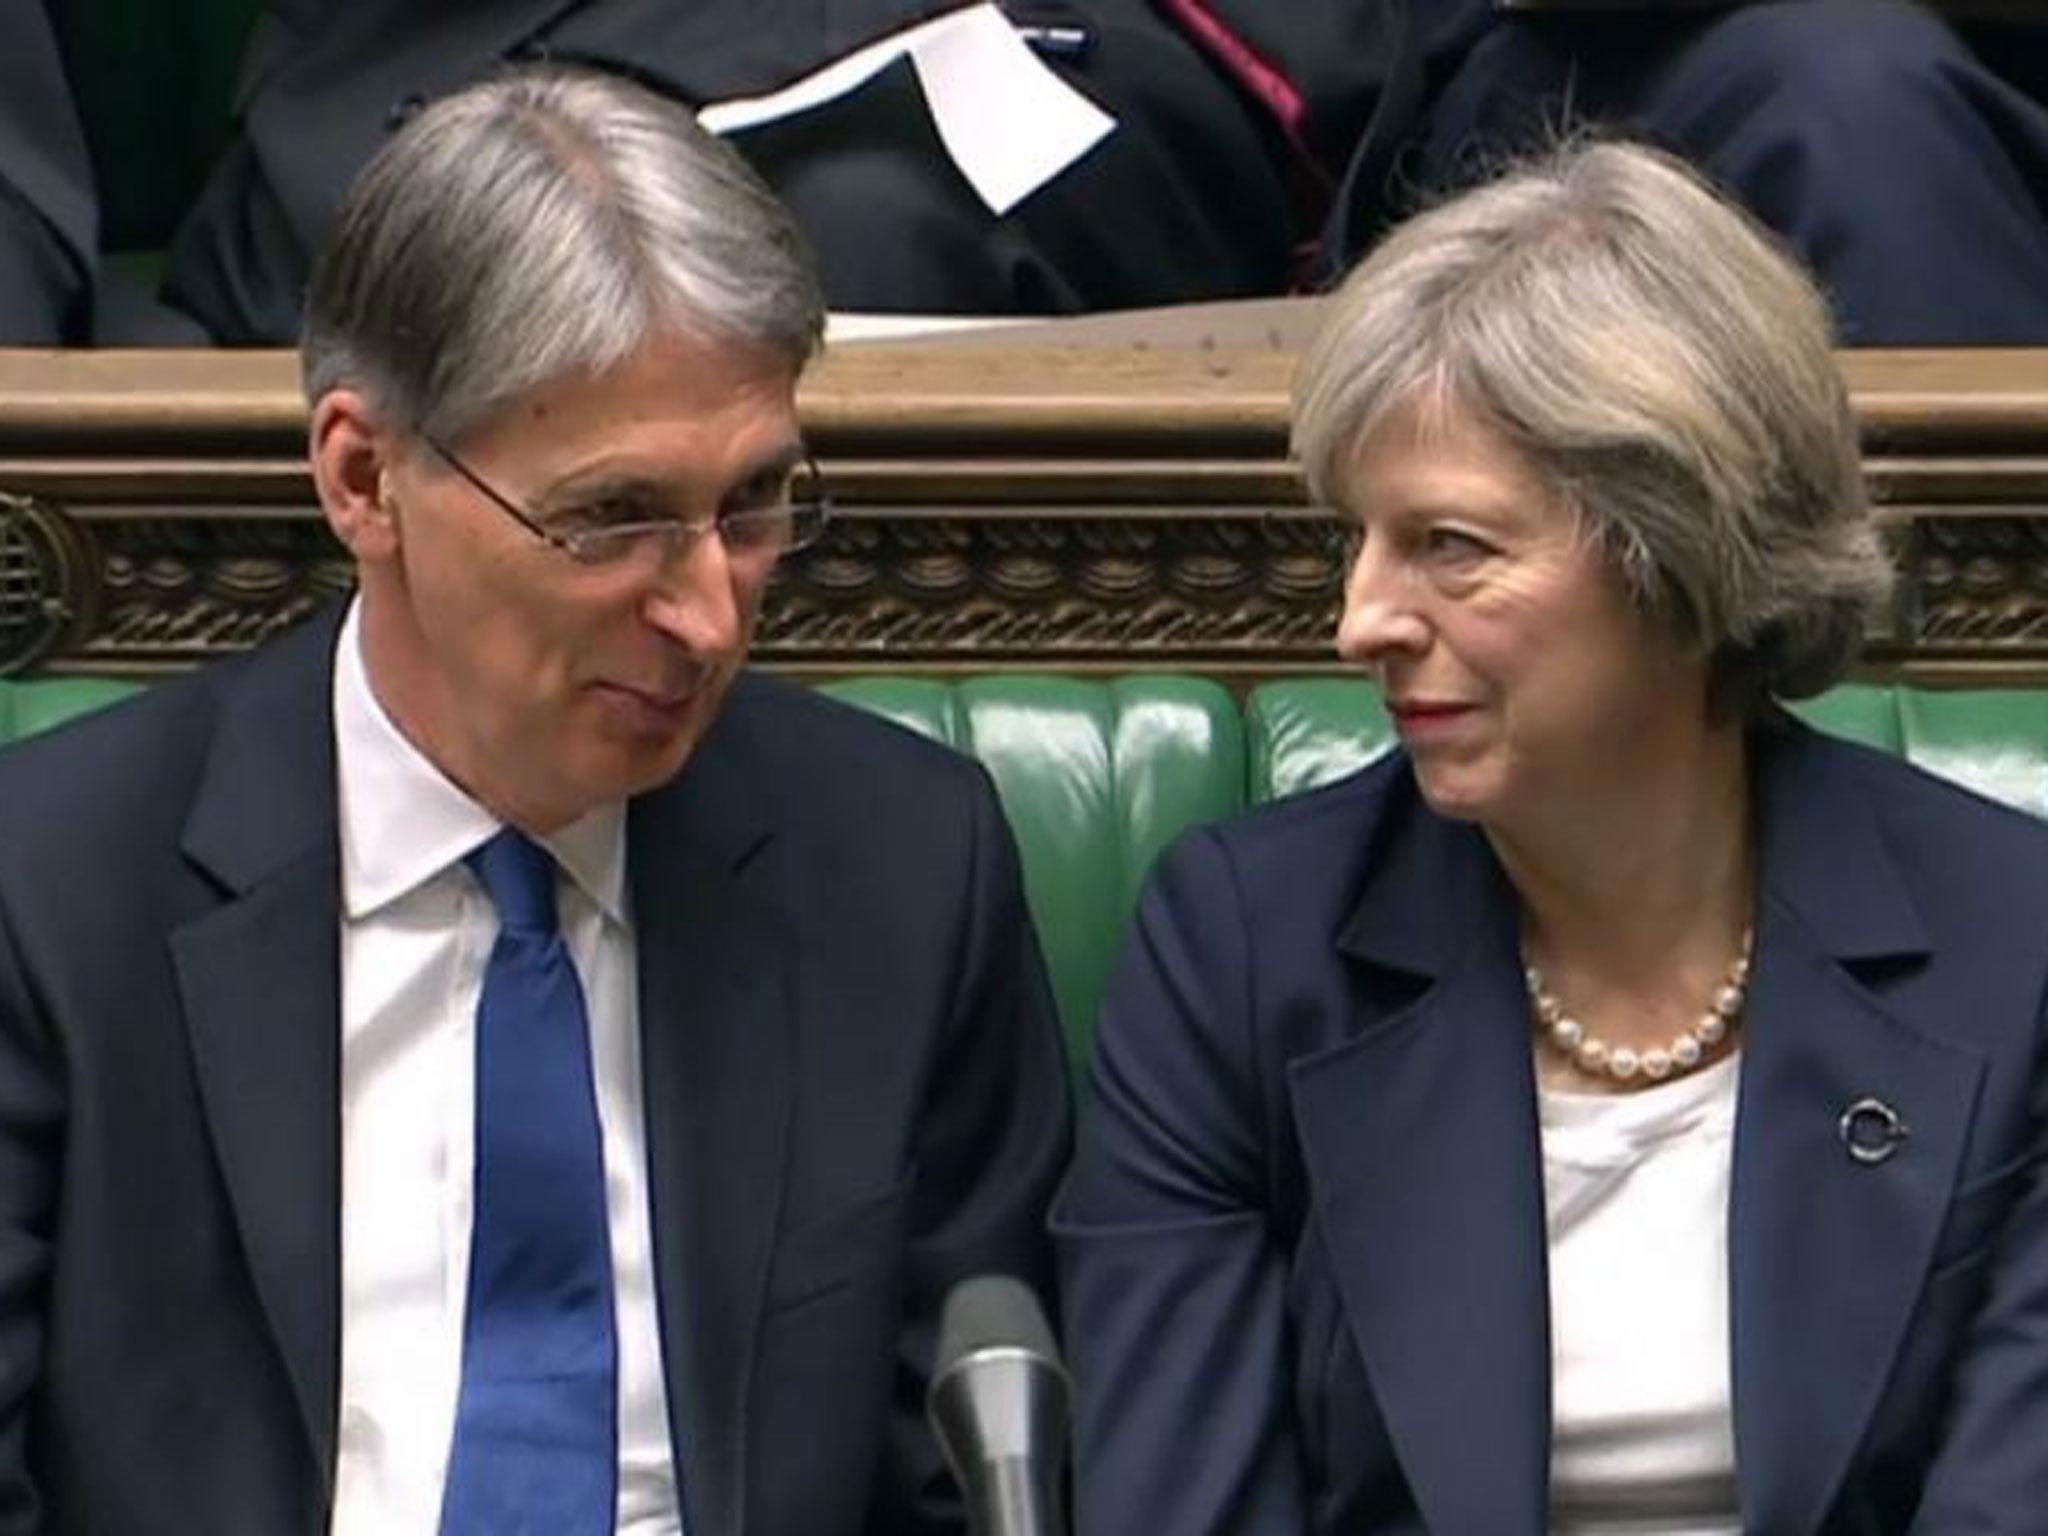 Philip Hammond said the Government would "review public spending priorities" before the next election